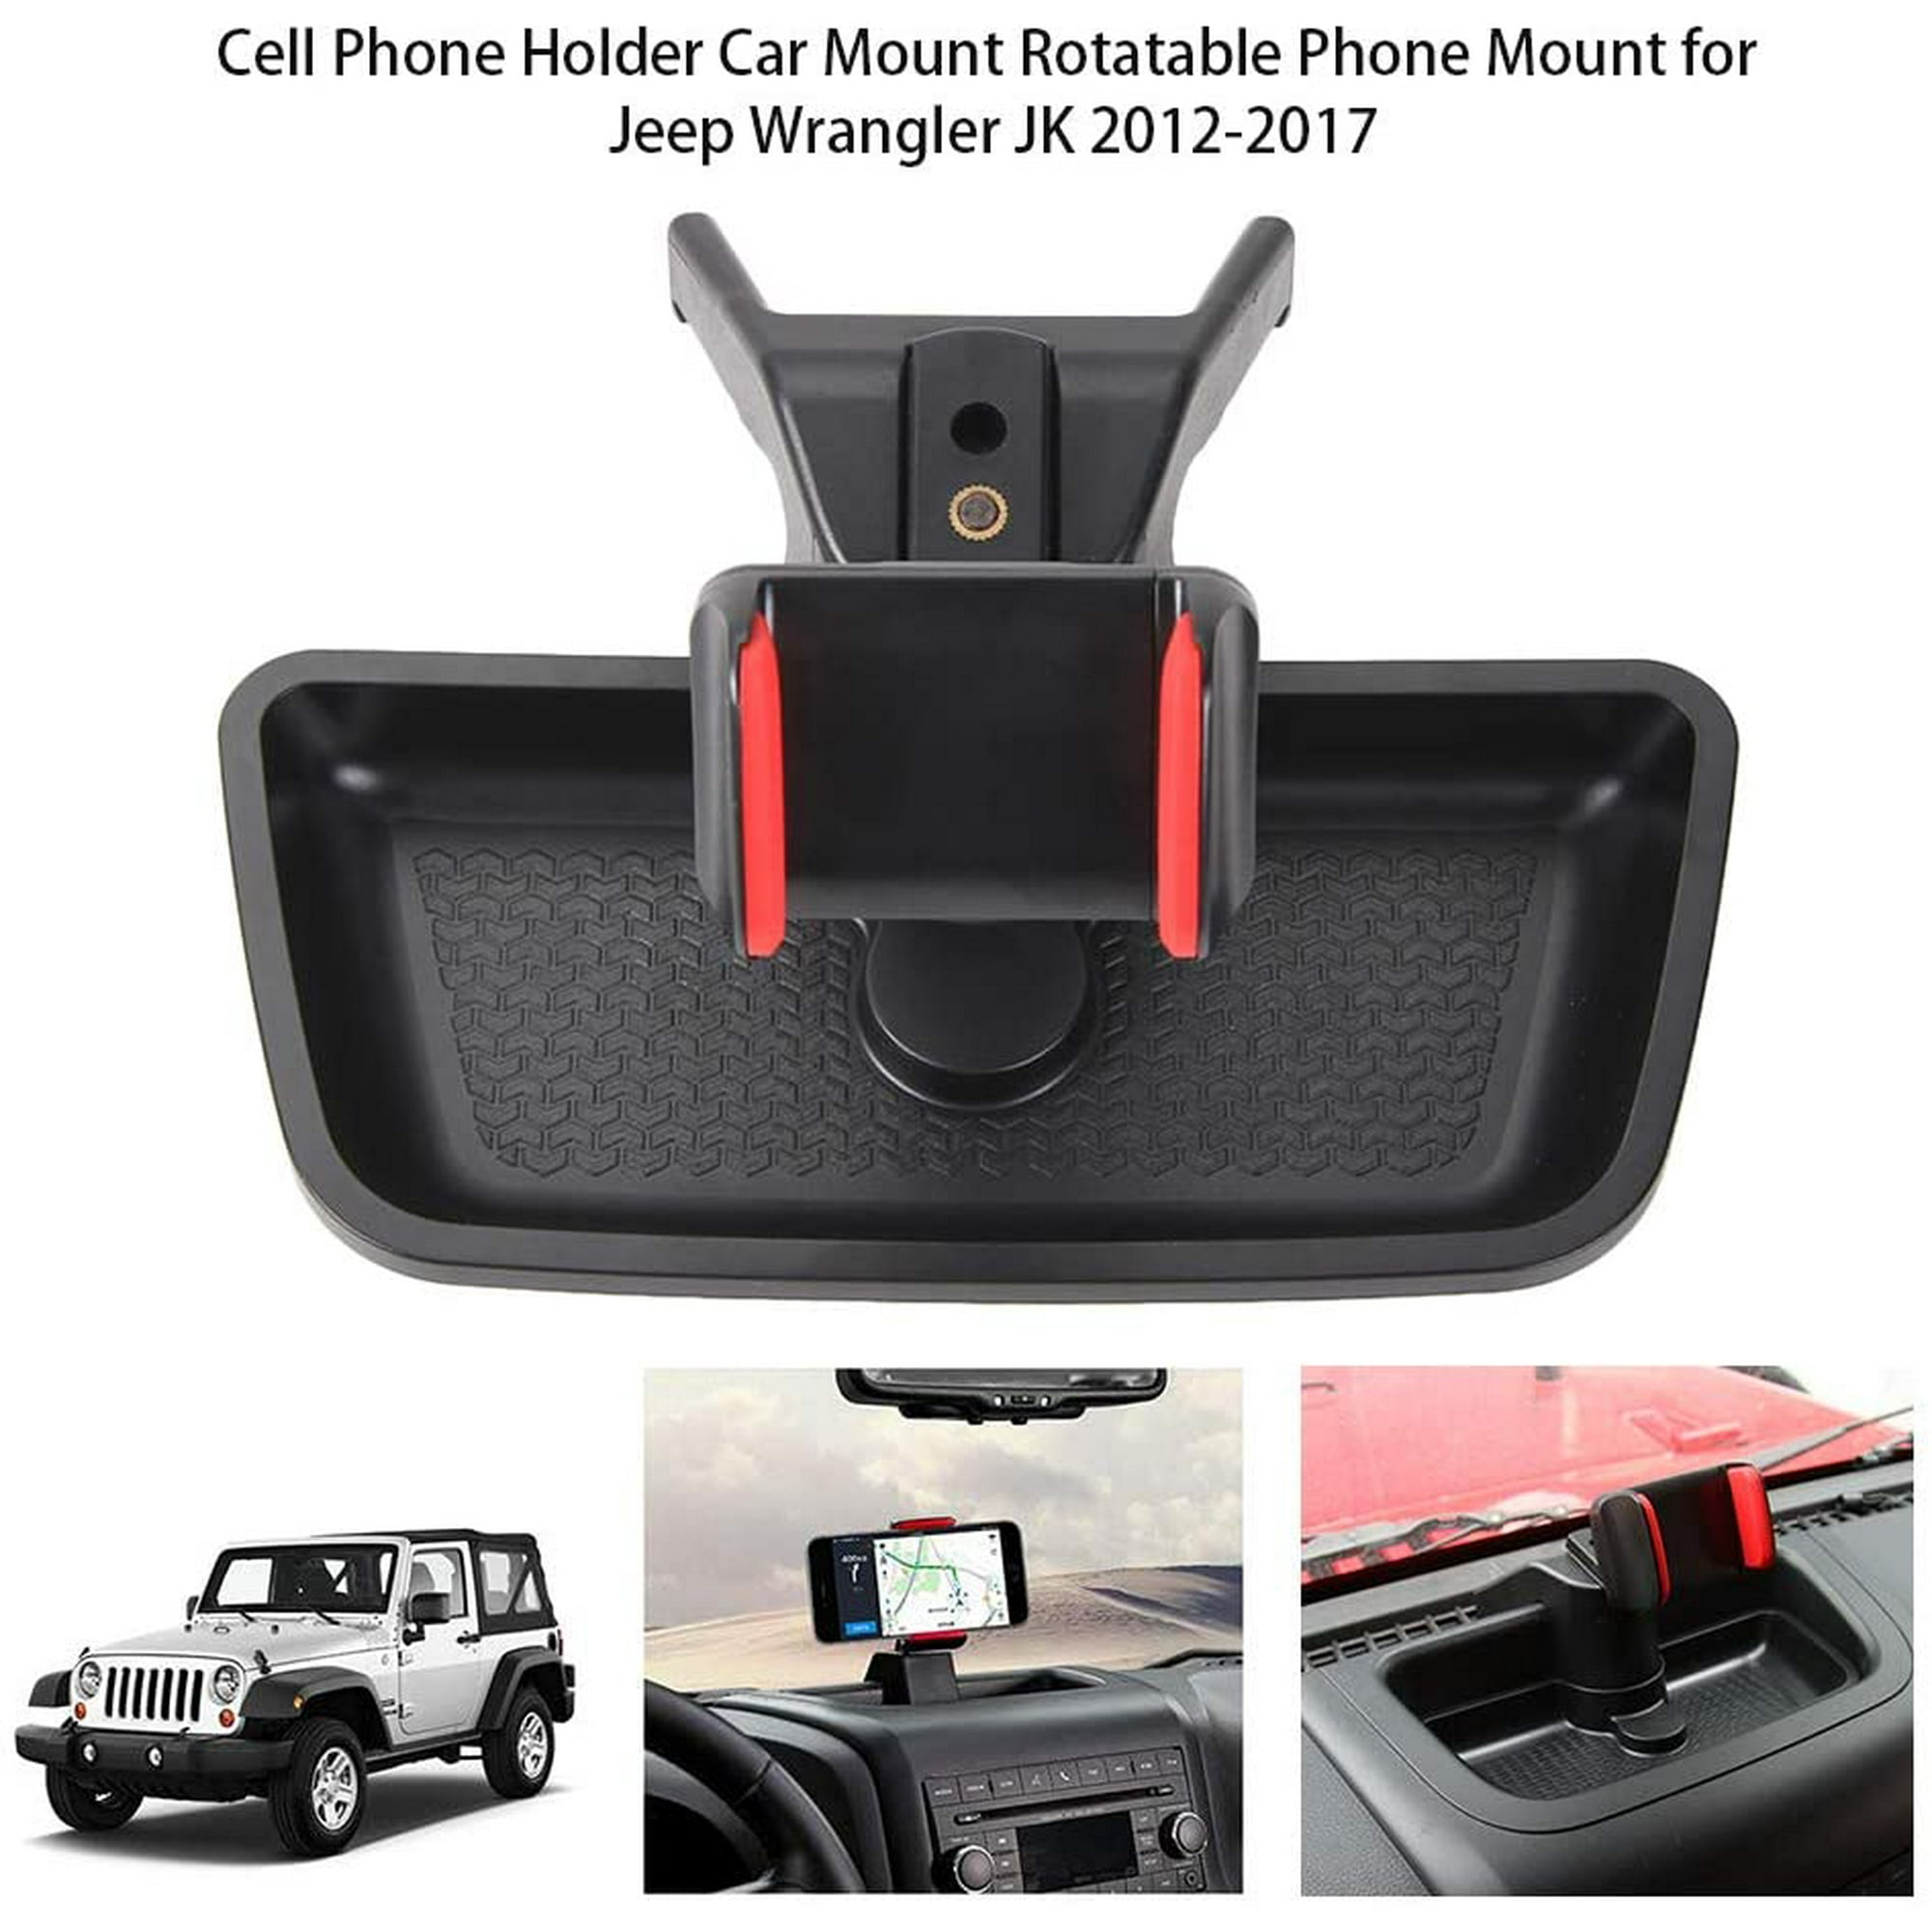 Cell Phone Holder, Car Mount Rotatable Phone Mount for Jeep Wrangler JK  2012-2 | Walmart Canada